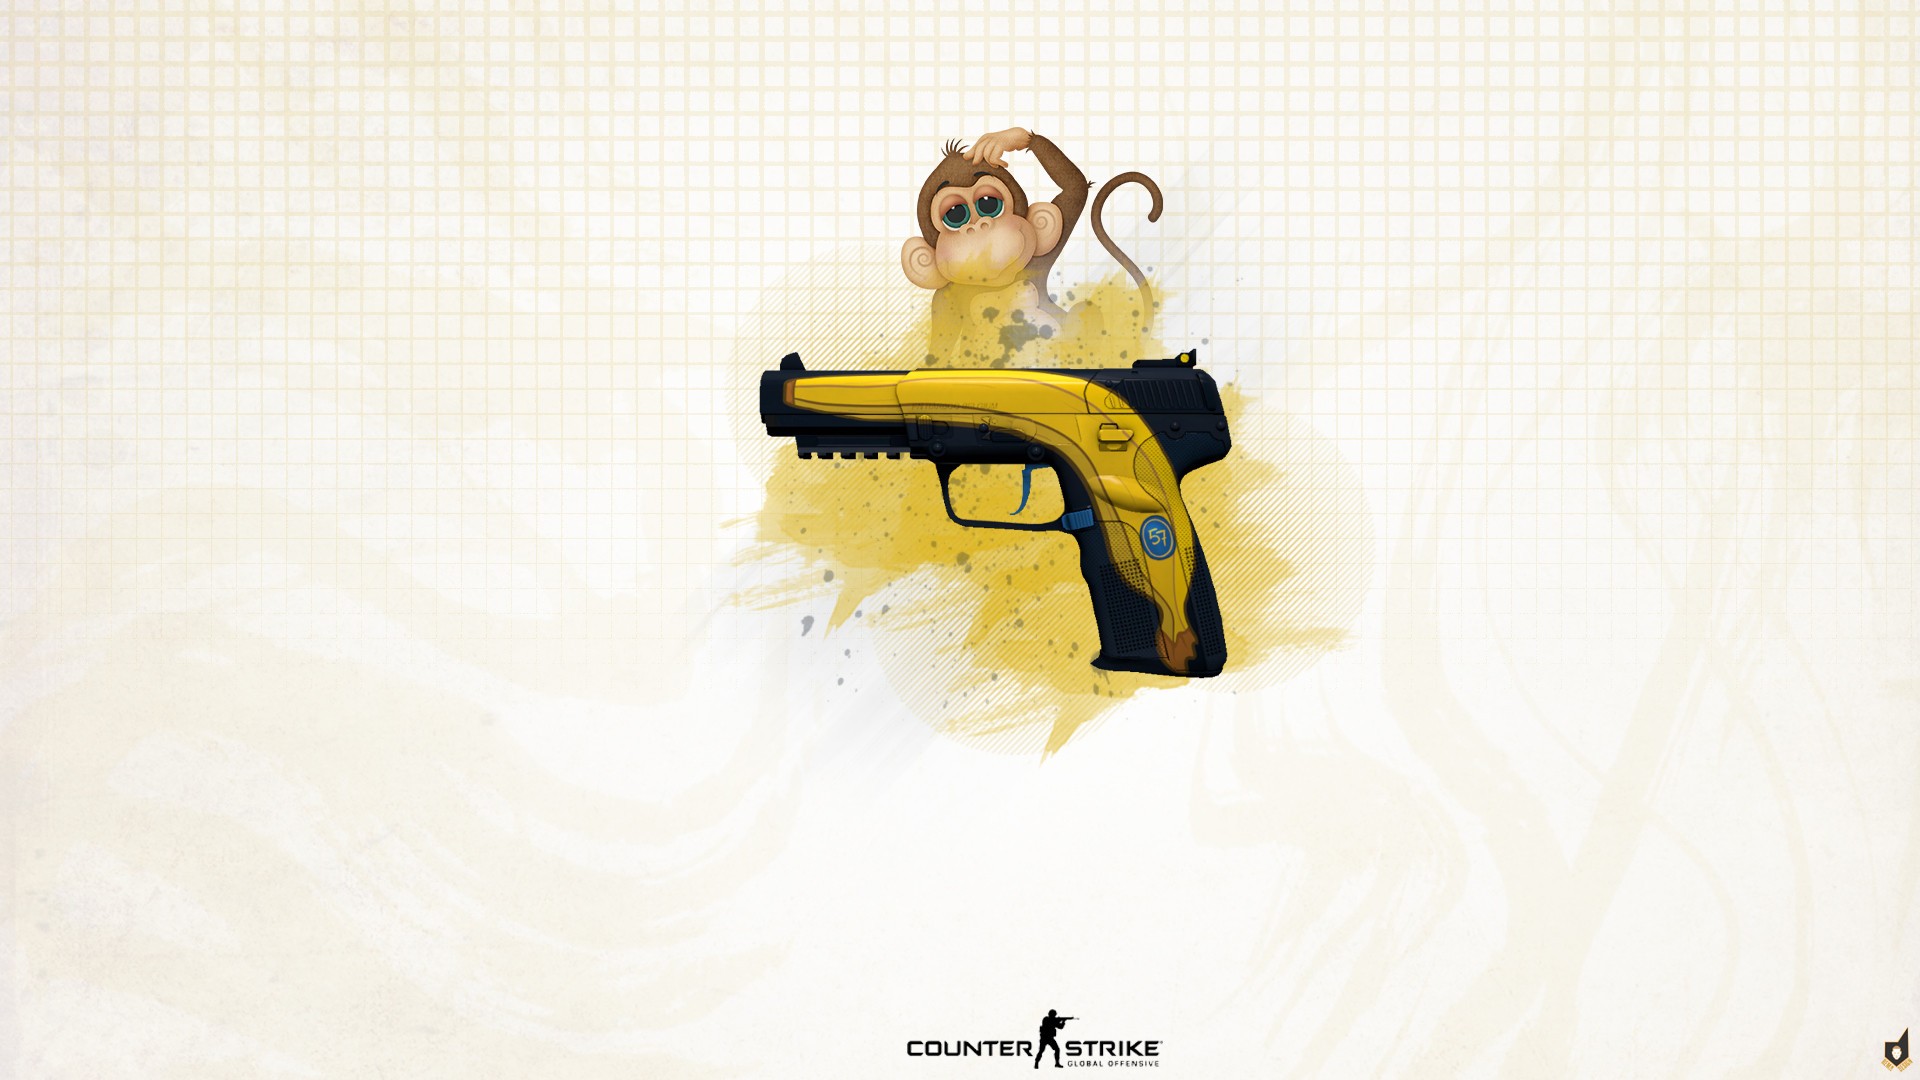 General 1920x1080 Counter-Strike Counter-Strike: Global Offensive pistol FN Five-Seven bananas monkey video games PC gaming white background simple background FN Herstal